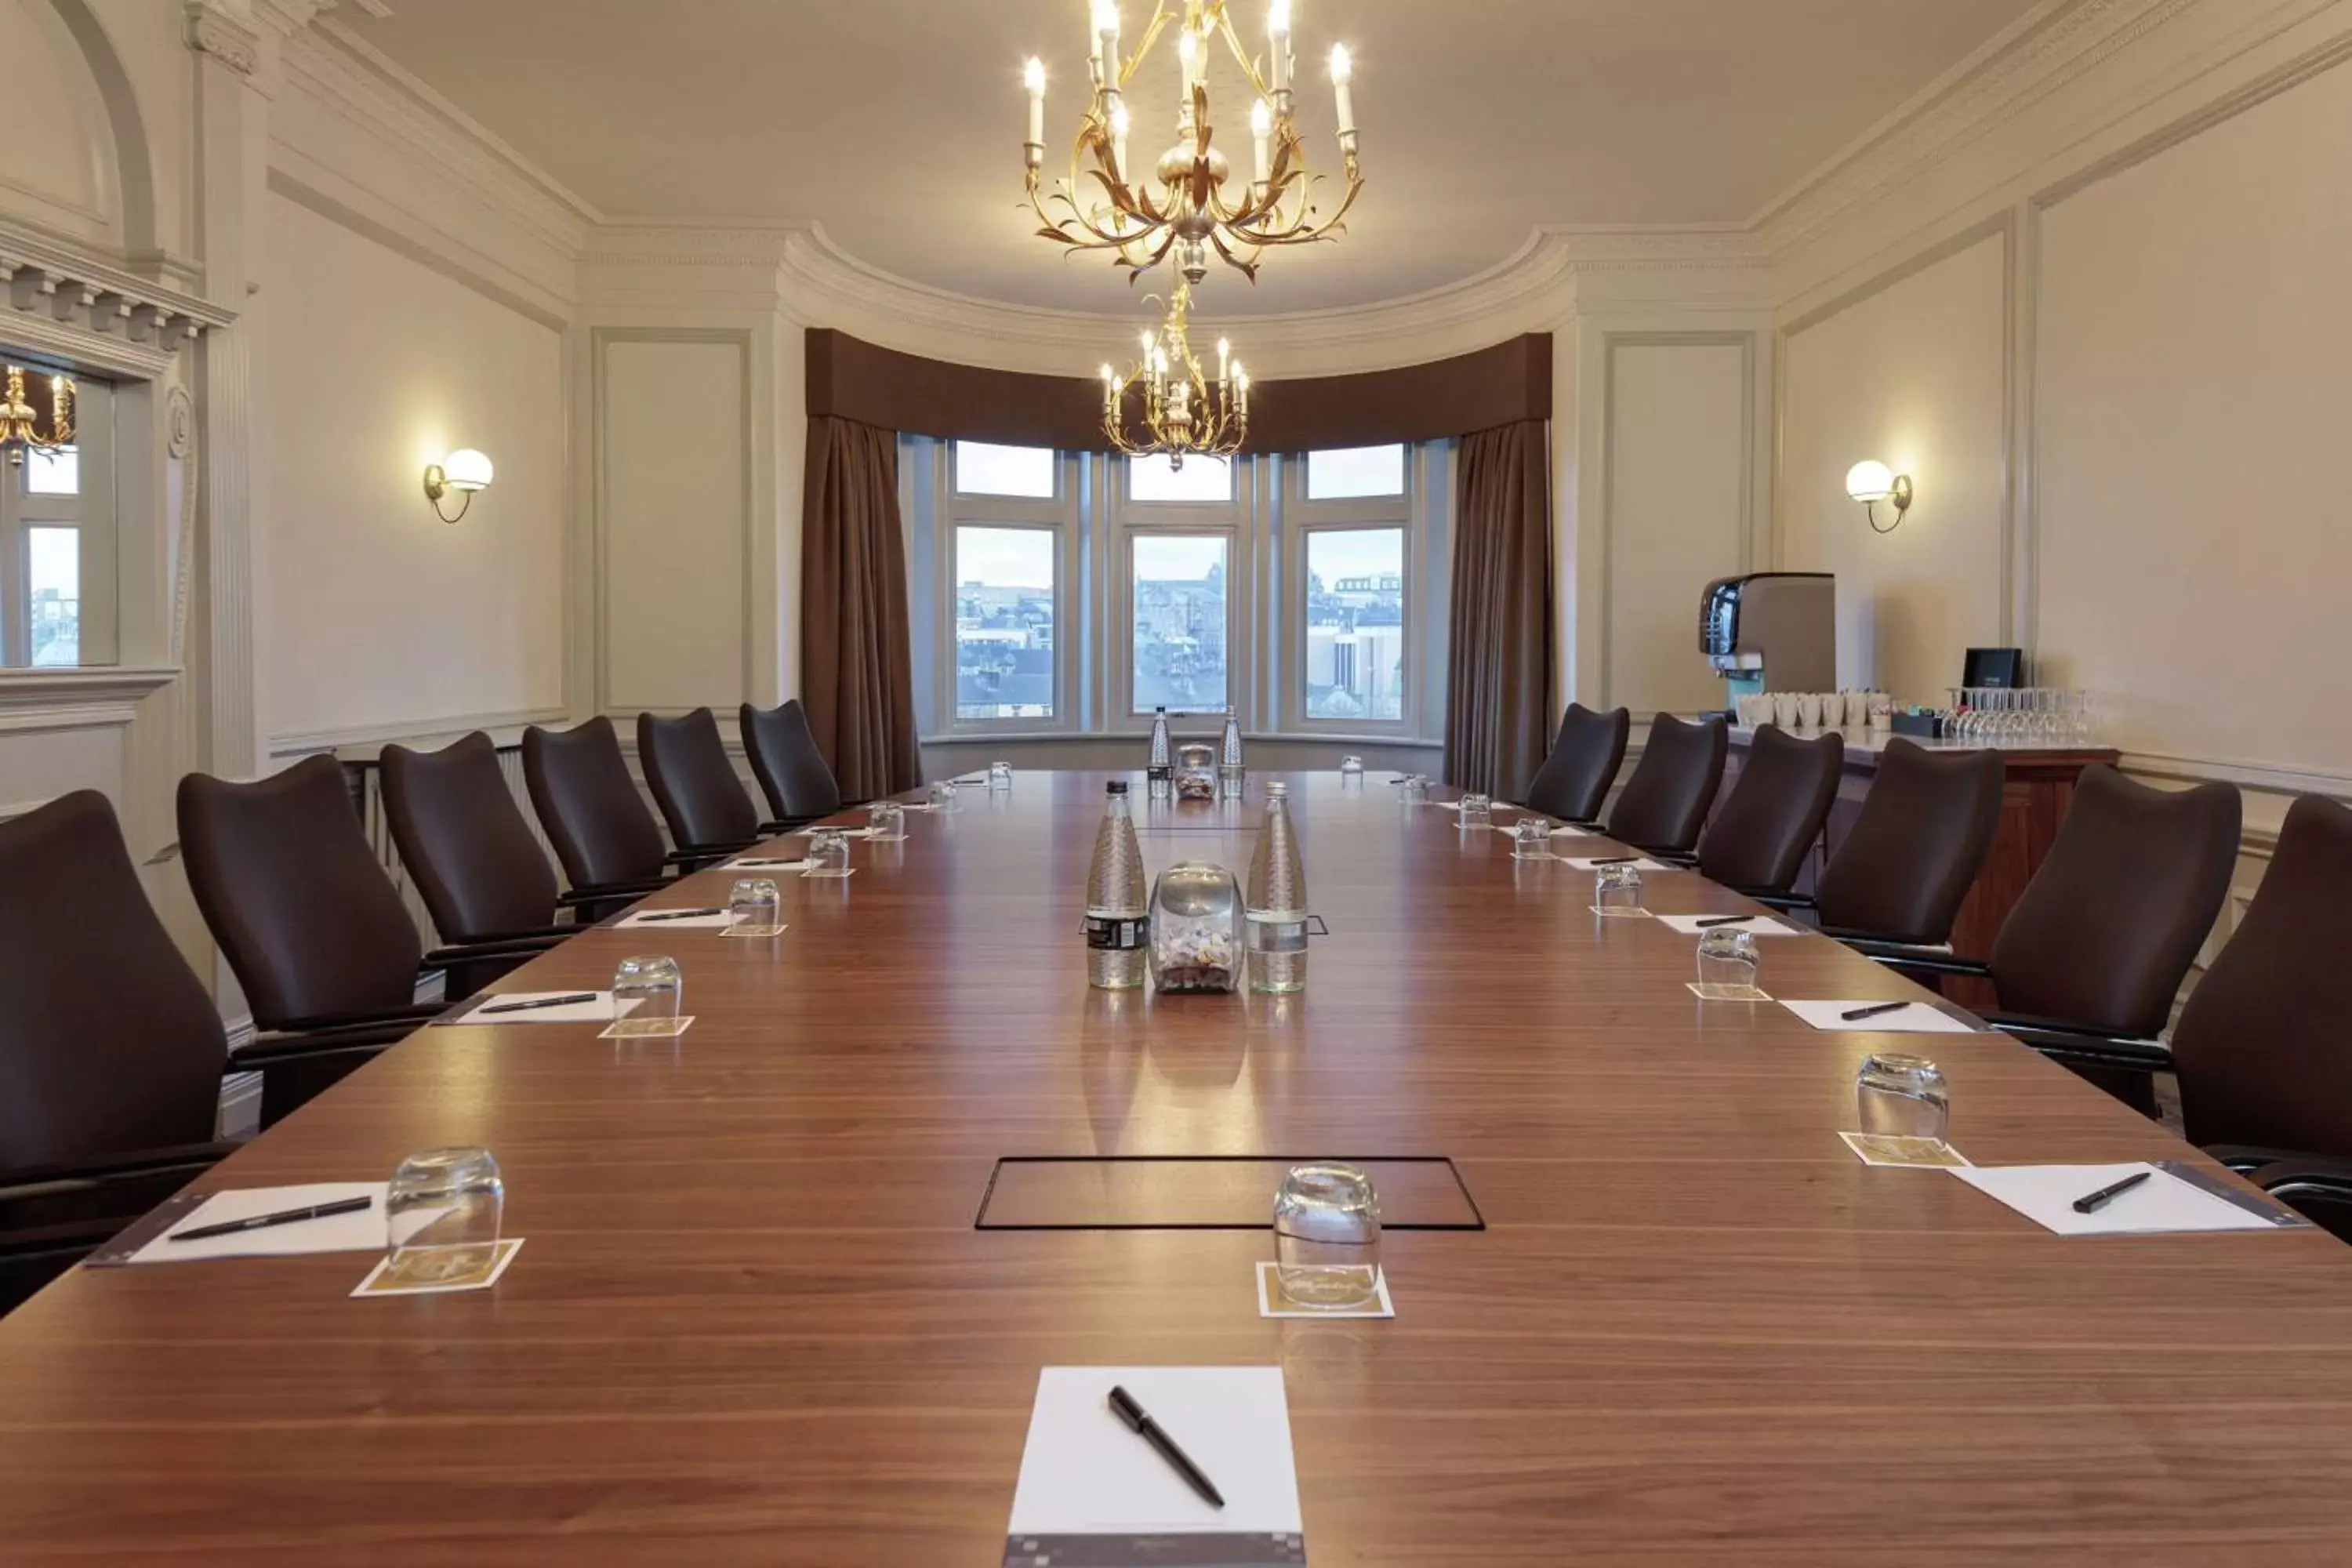 Meeting/conference room in DoubleTree by Hilton Harrogate Majestic Hotel & Spa